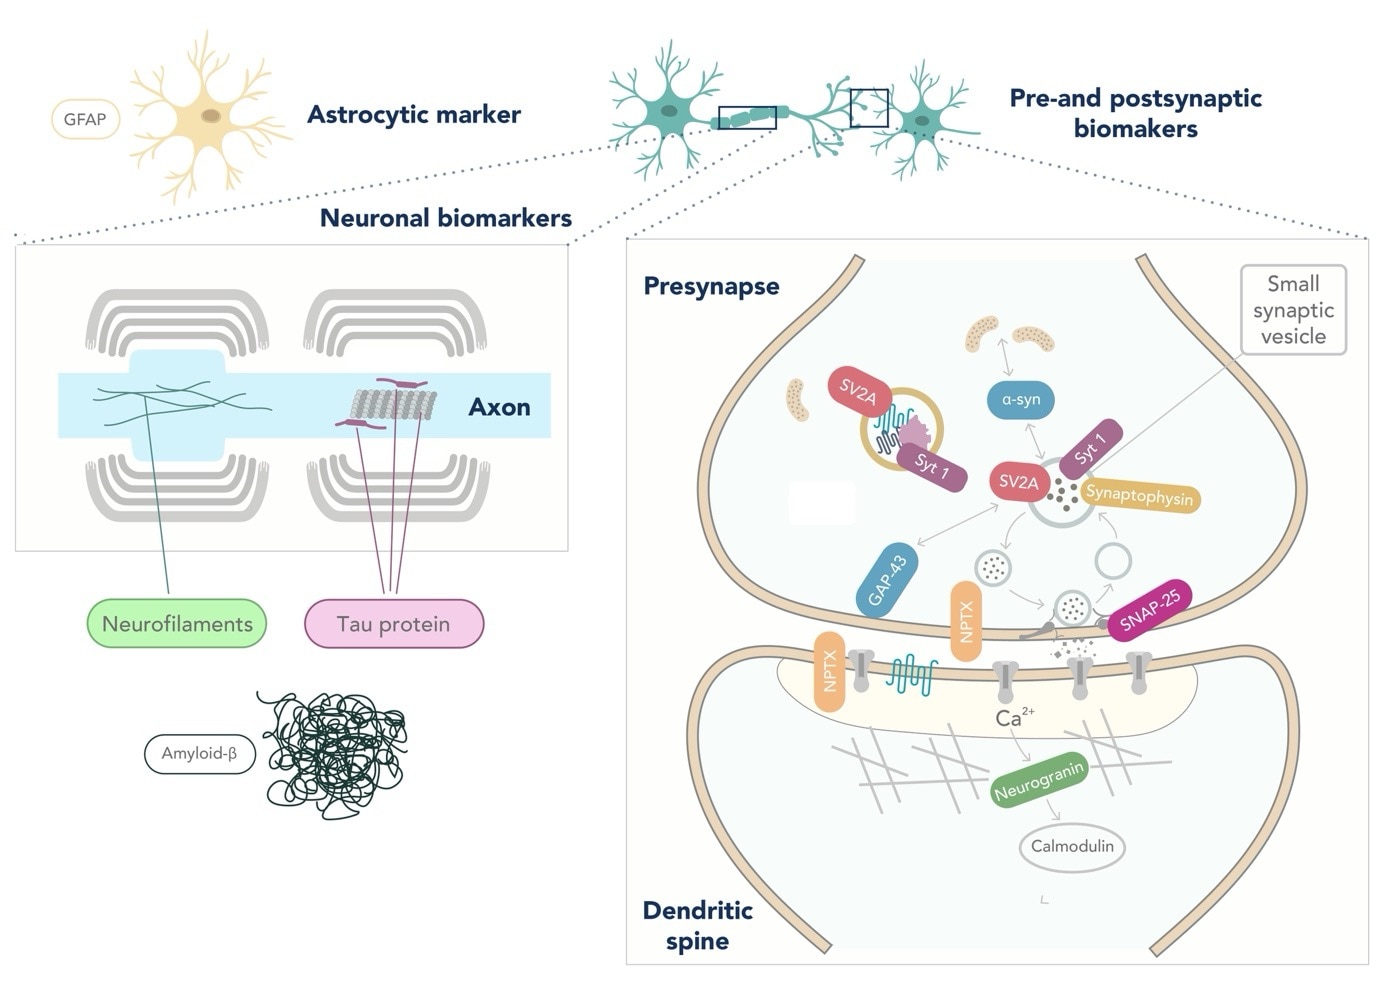 Graphic depicting a neuron and synapse with labels for popular neurodegeneration biomarkers.